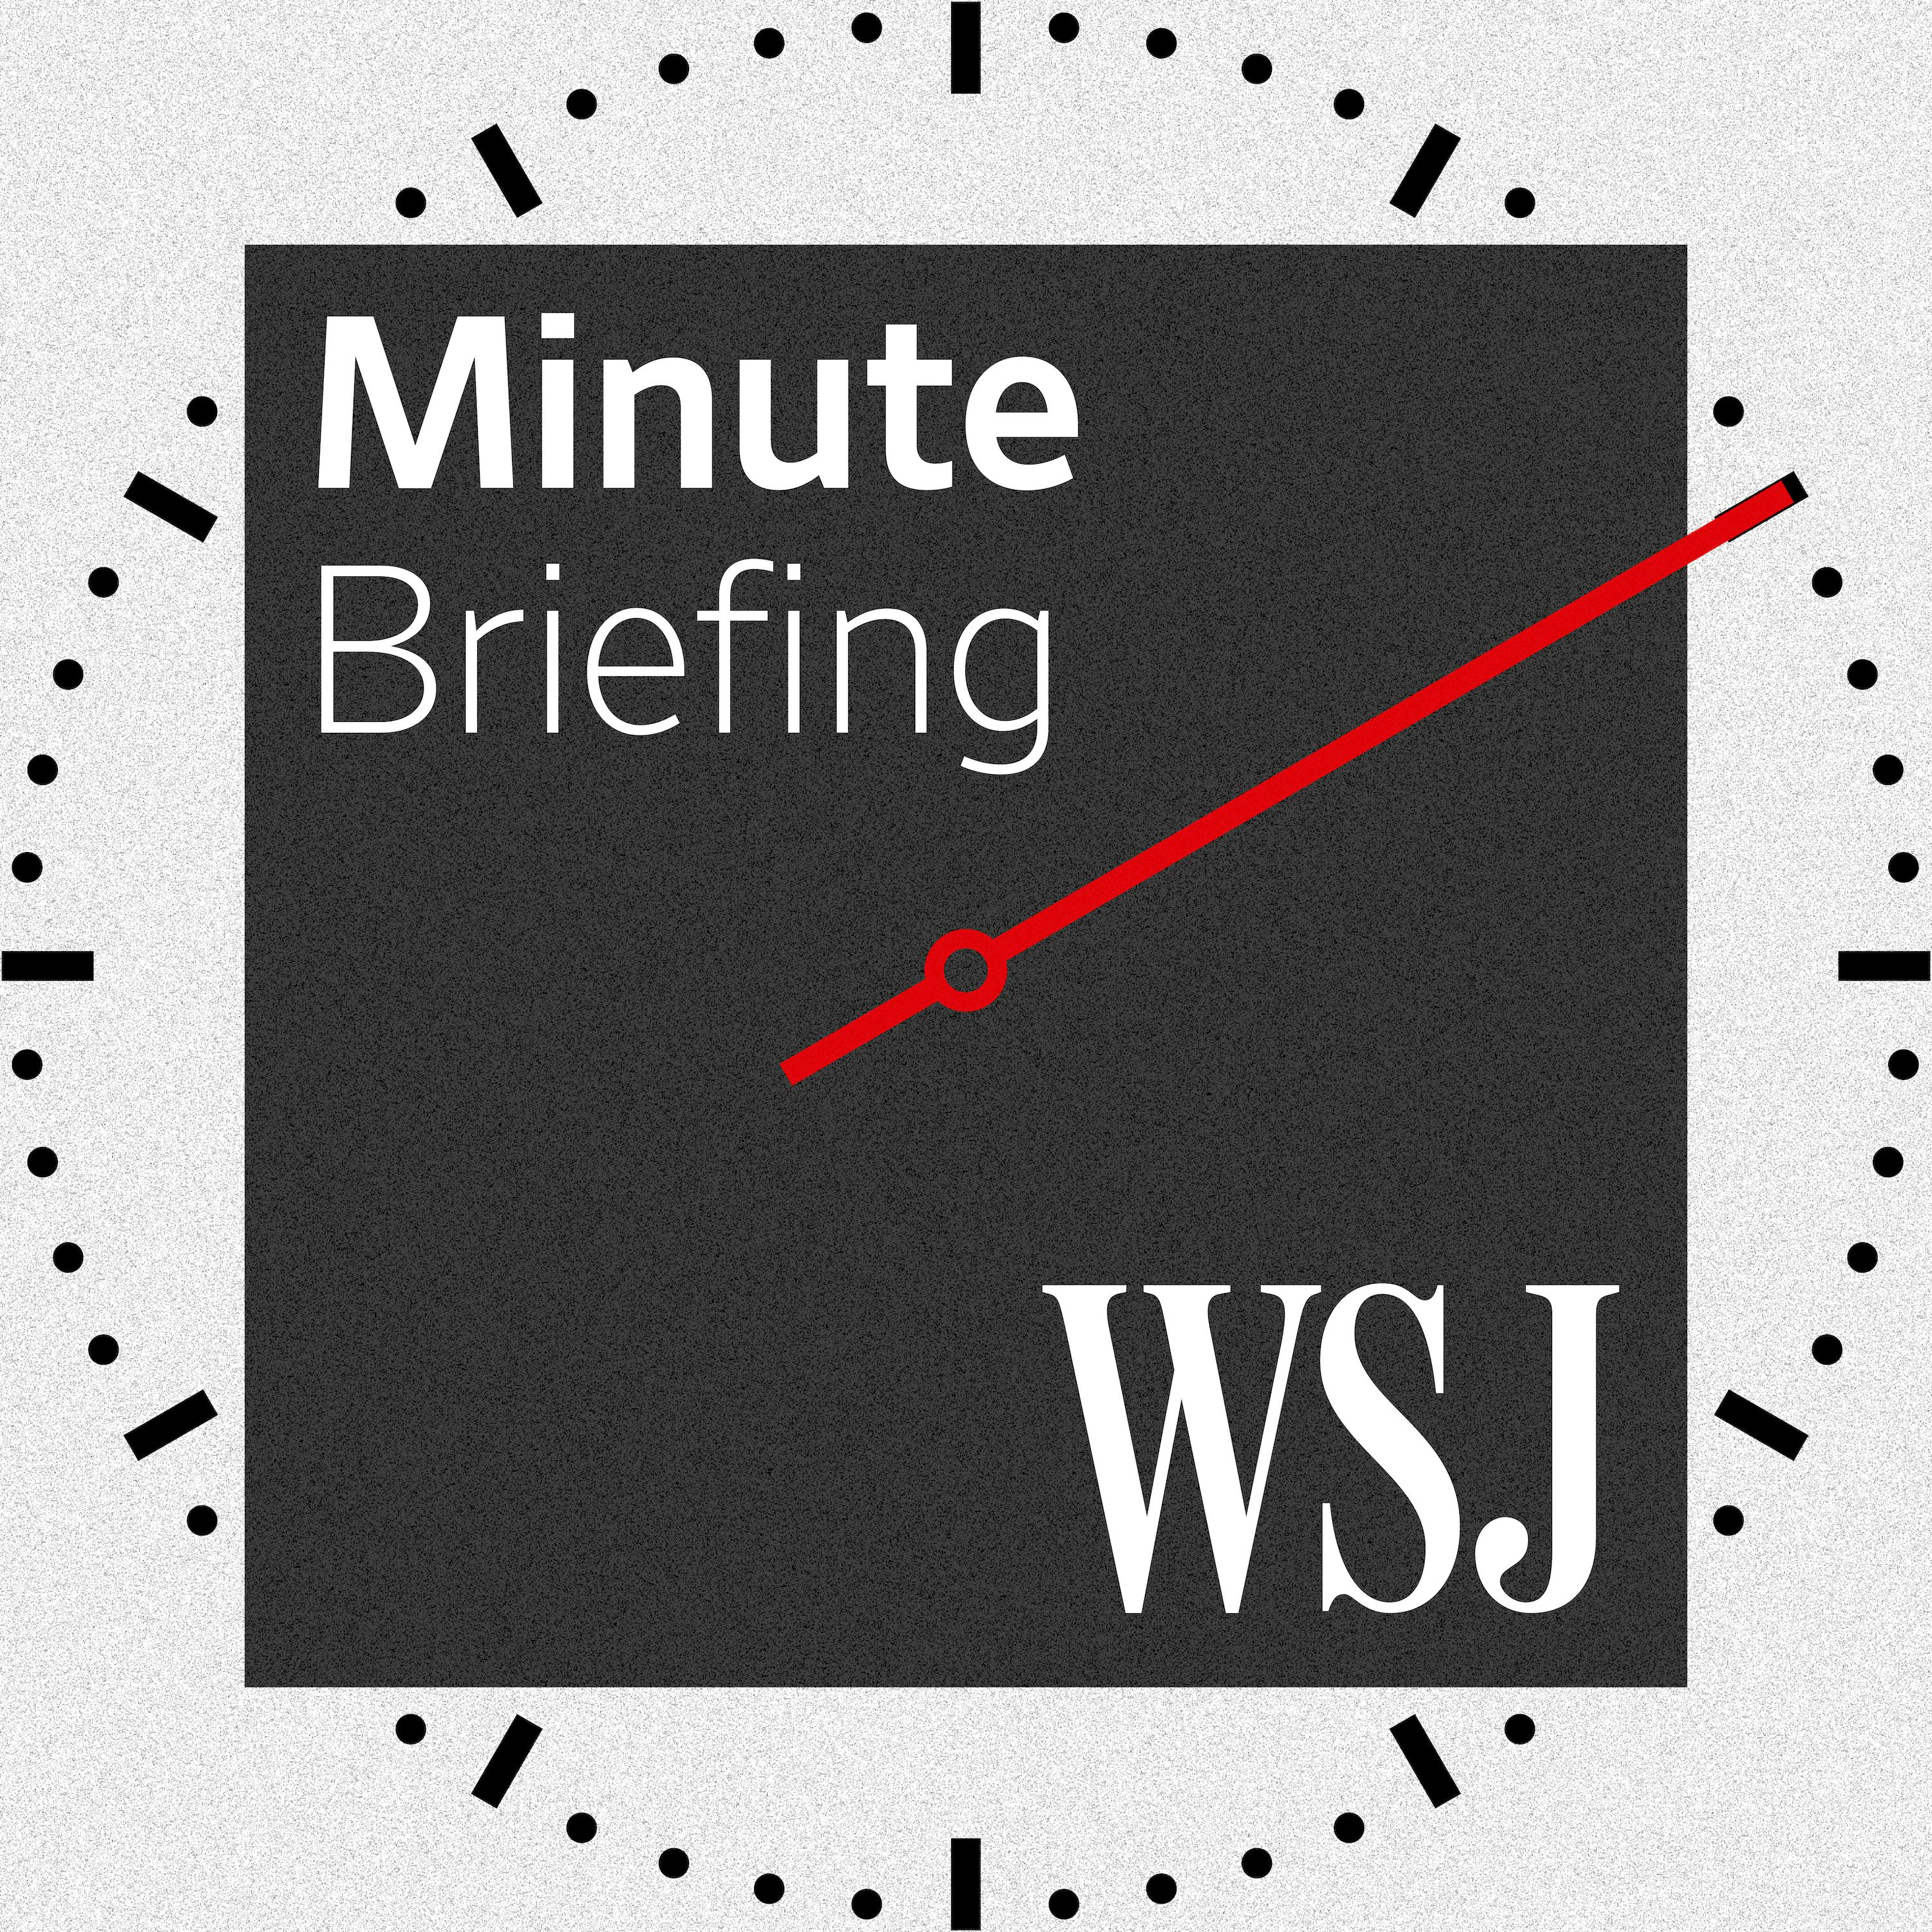 WSJ Minute Briefing cover image